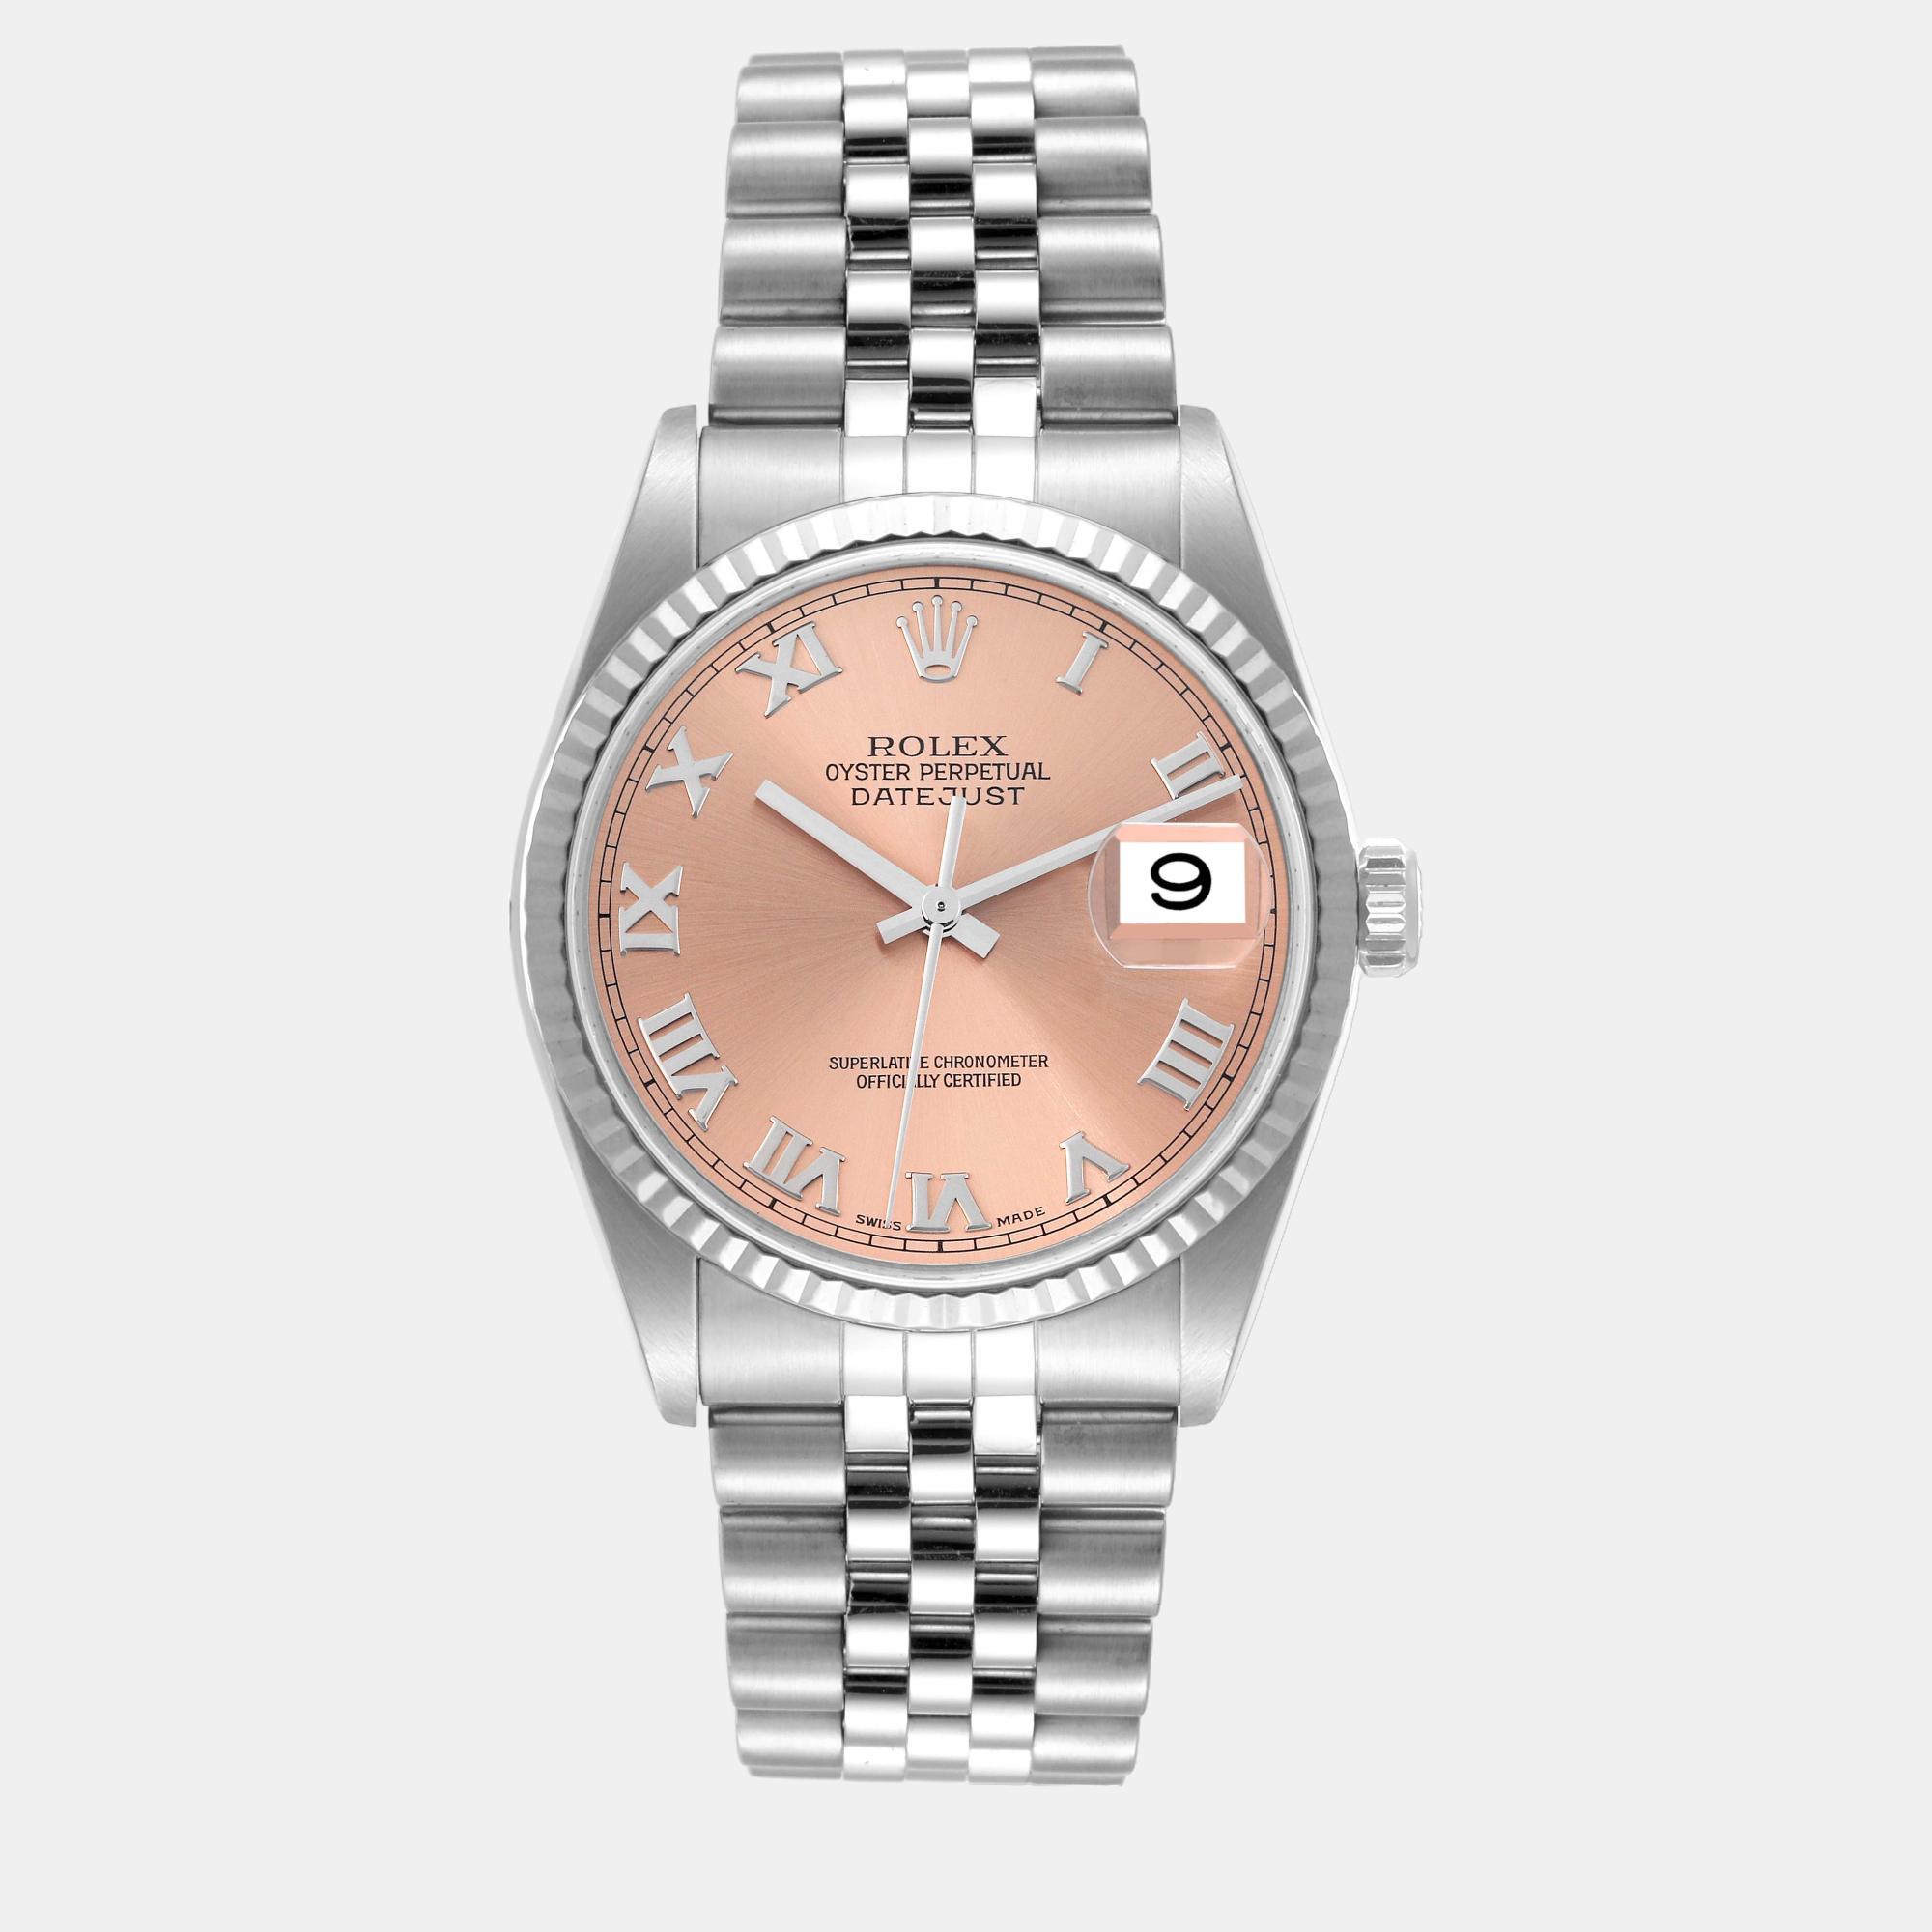 Pre-owned Rolex Datejust 36 Steel White Gold Salmon Roman Dial Men's Watch 16234 36 Mm In Pink